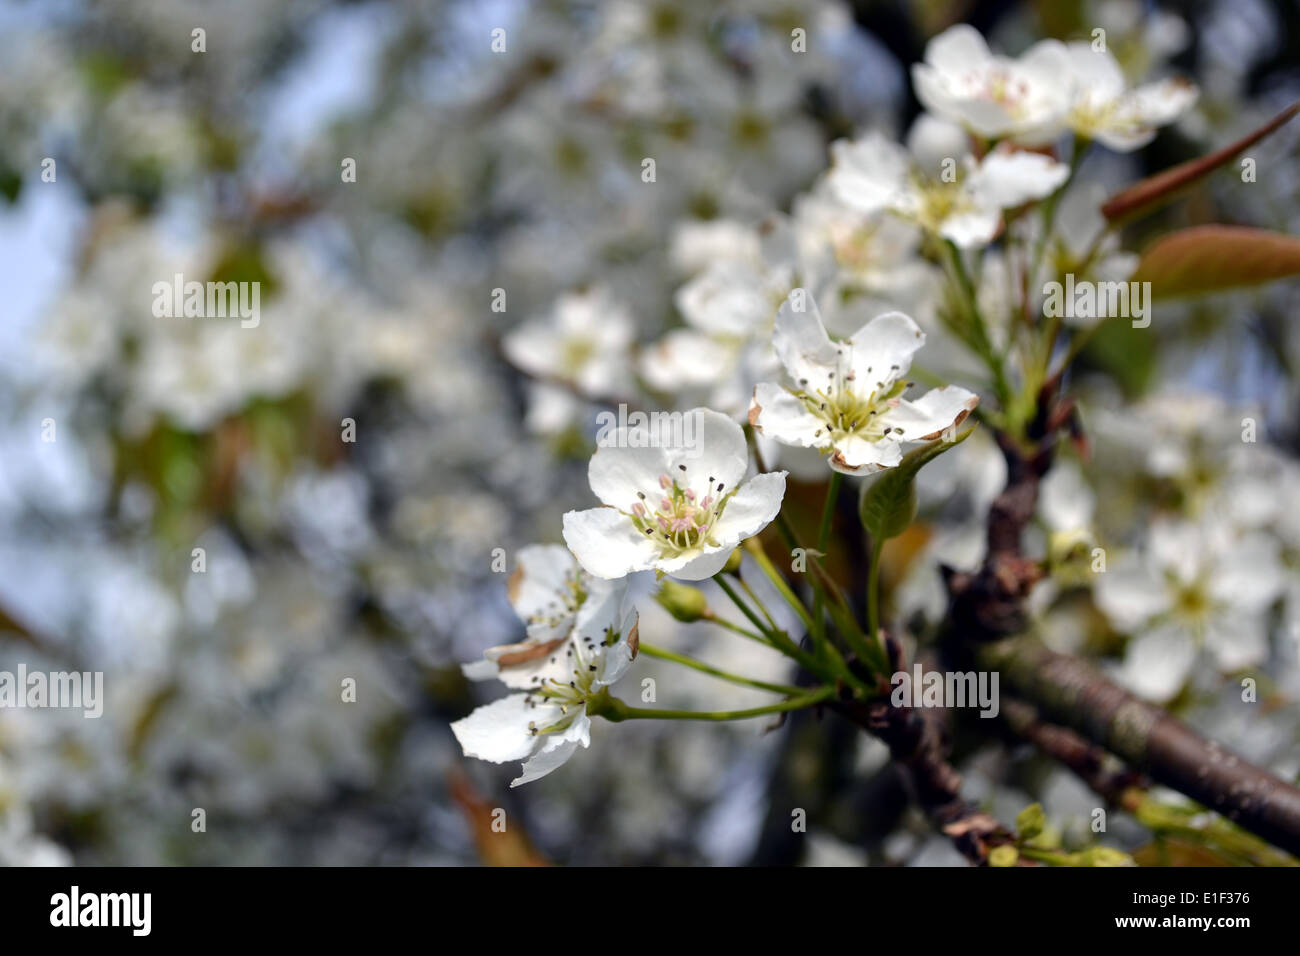 Spring blossom of Pyrus ussuriensis blossom, commonly know as Ussurian pear, Harbin pear or Manchurian pear tree. Stock Photo